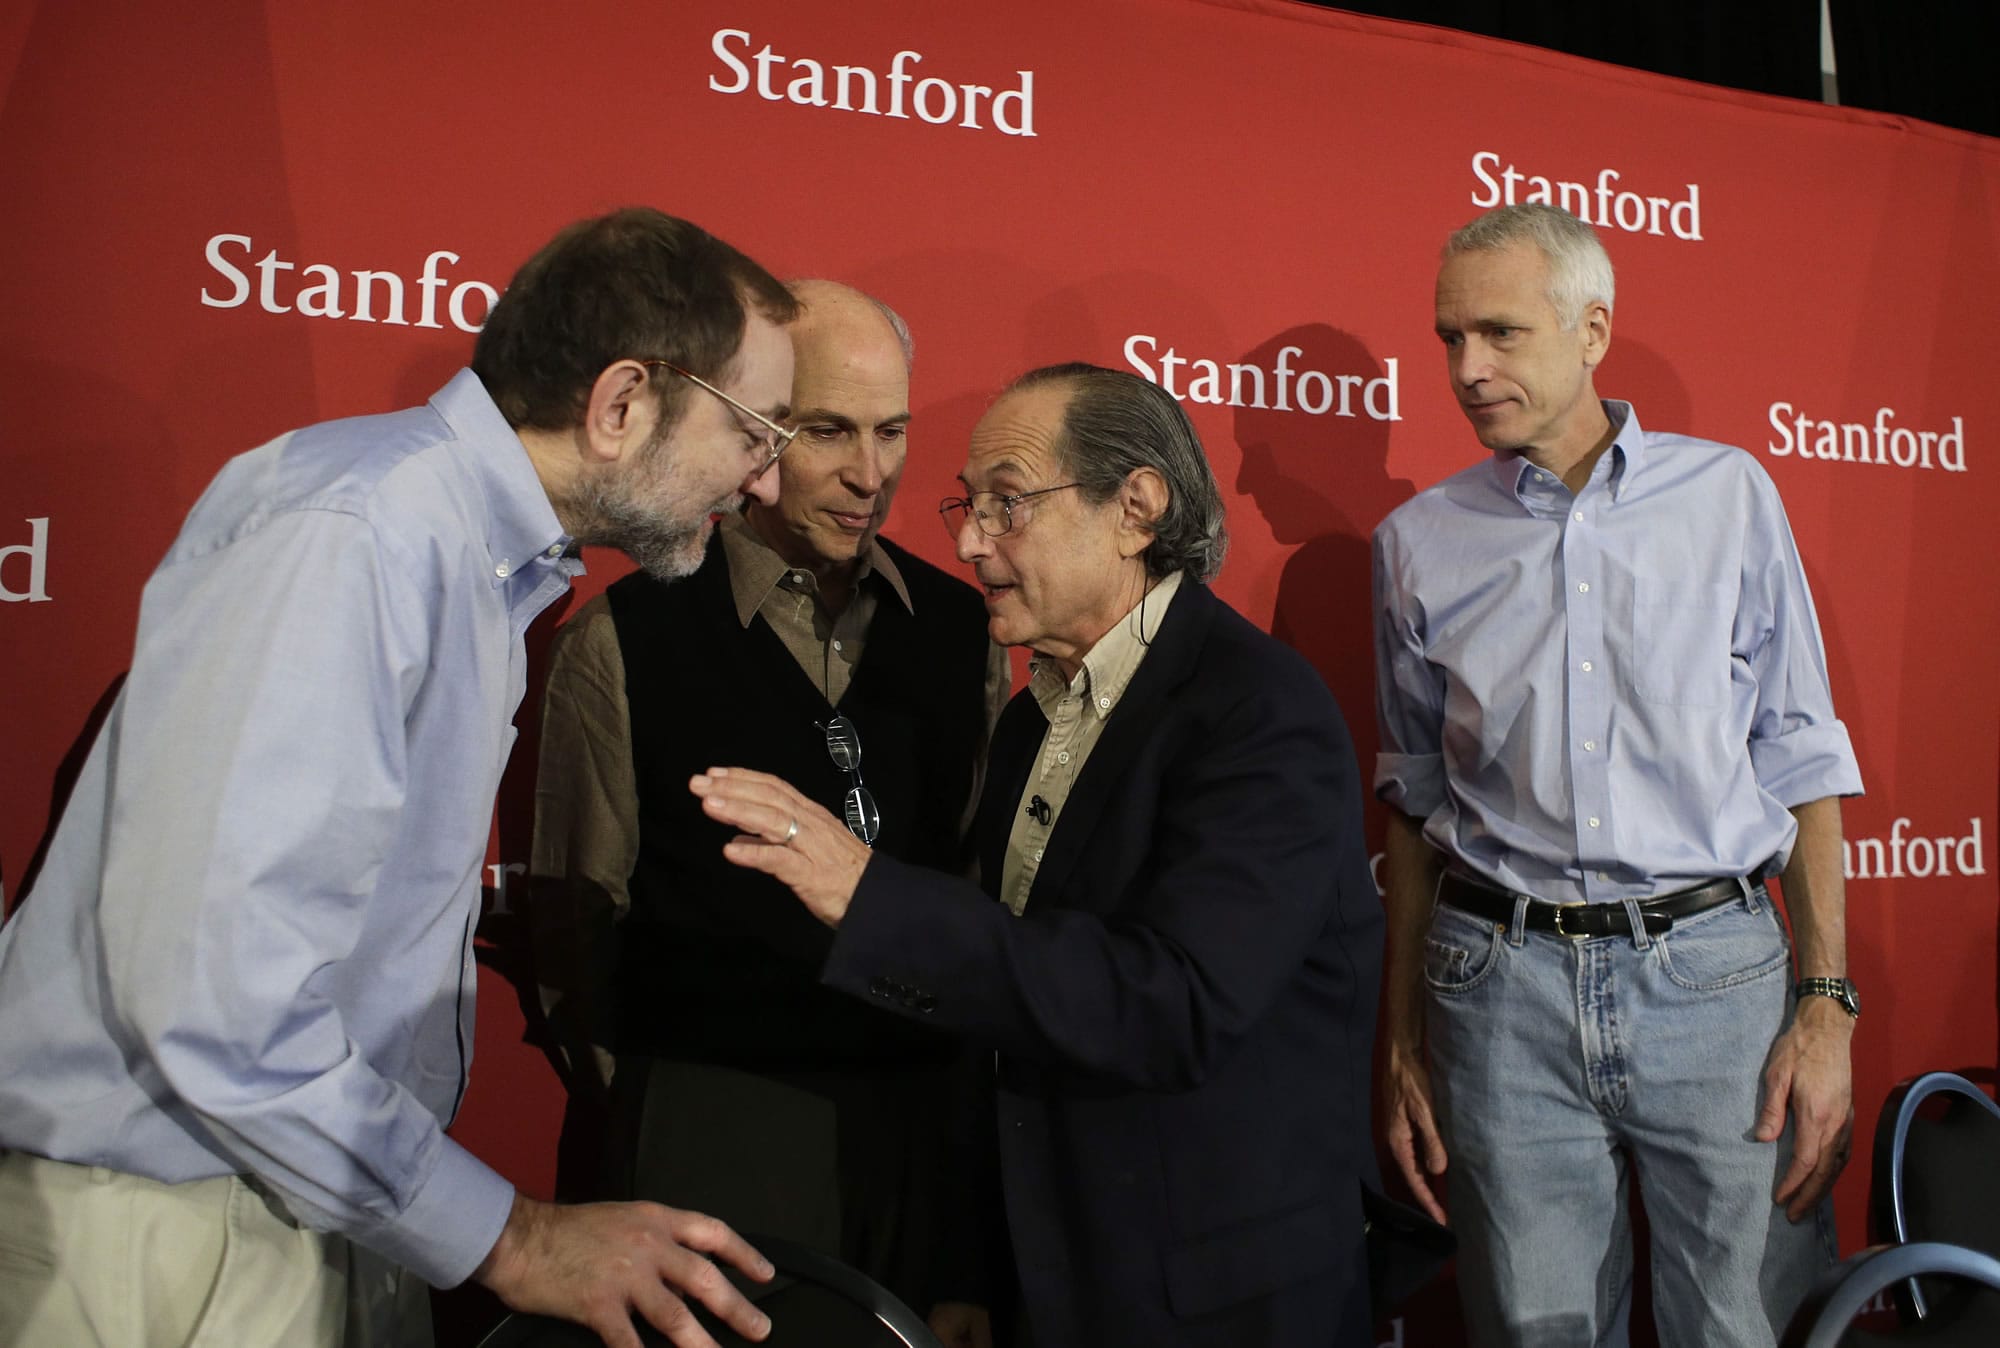 Michael Levitt, third from left, a professor at Stanford University who won the 2013 Nobel Prize in chemistry, talks with fellow Stanford Nobel laureates Andrew Fire, left, Roger Kornberg, second from left, as Brian Kobilka, right, looks on following a news conference Wednesday, in Stanford, Calif.